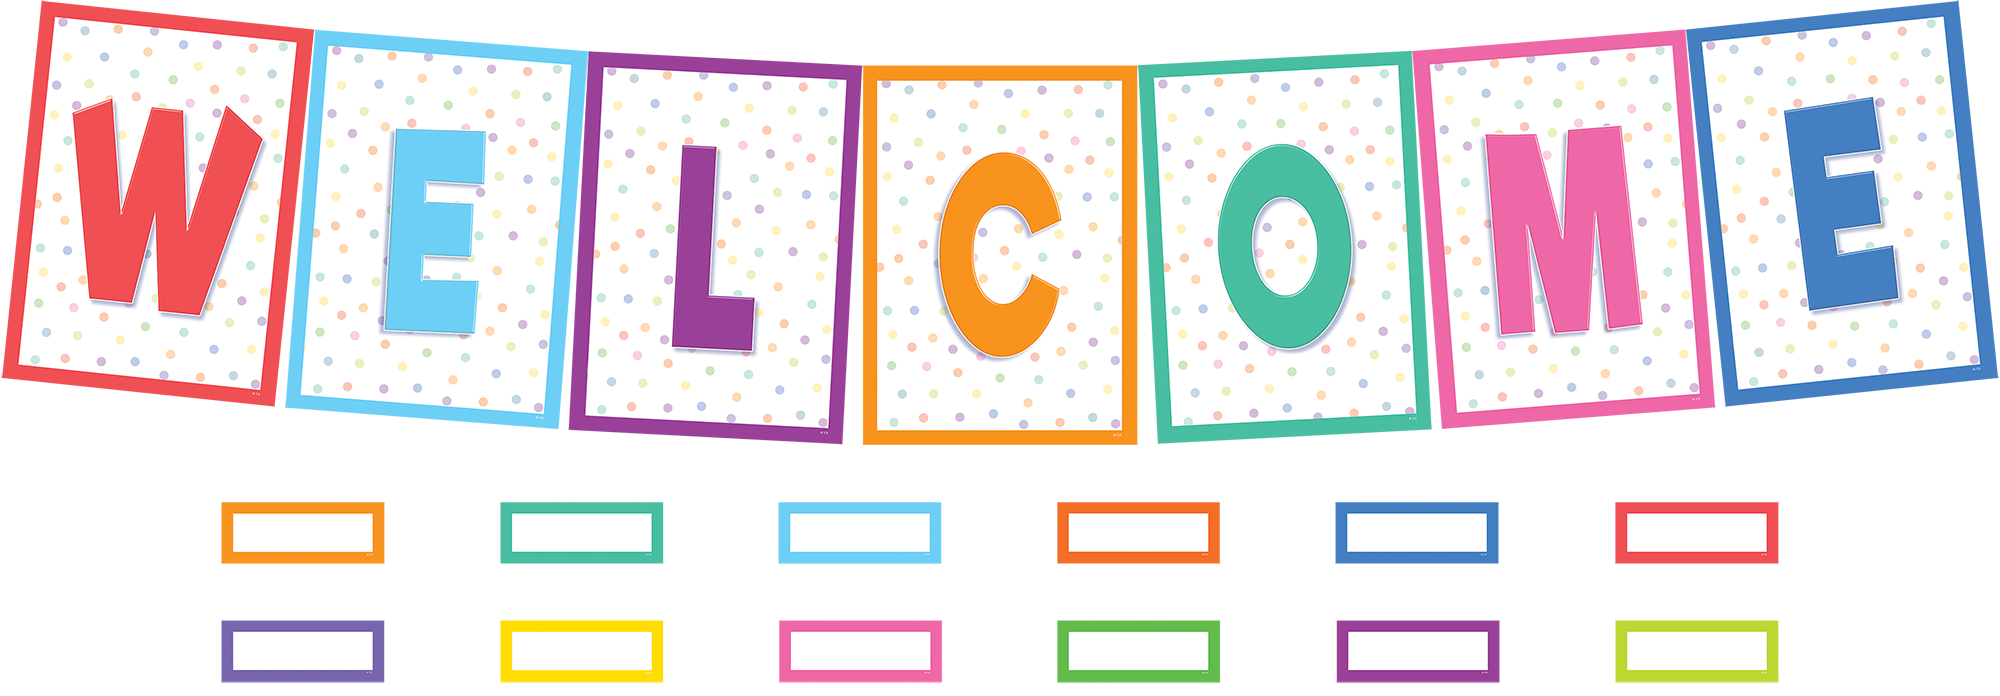 Features: 7 title pieces spelling out “Welcome”, 40 multi-purpose blank labels, bulletin board guide with set-up and activity suggestions, shiny protective coating for durability